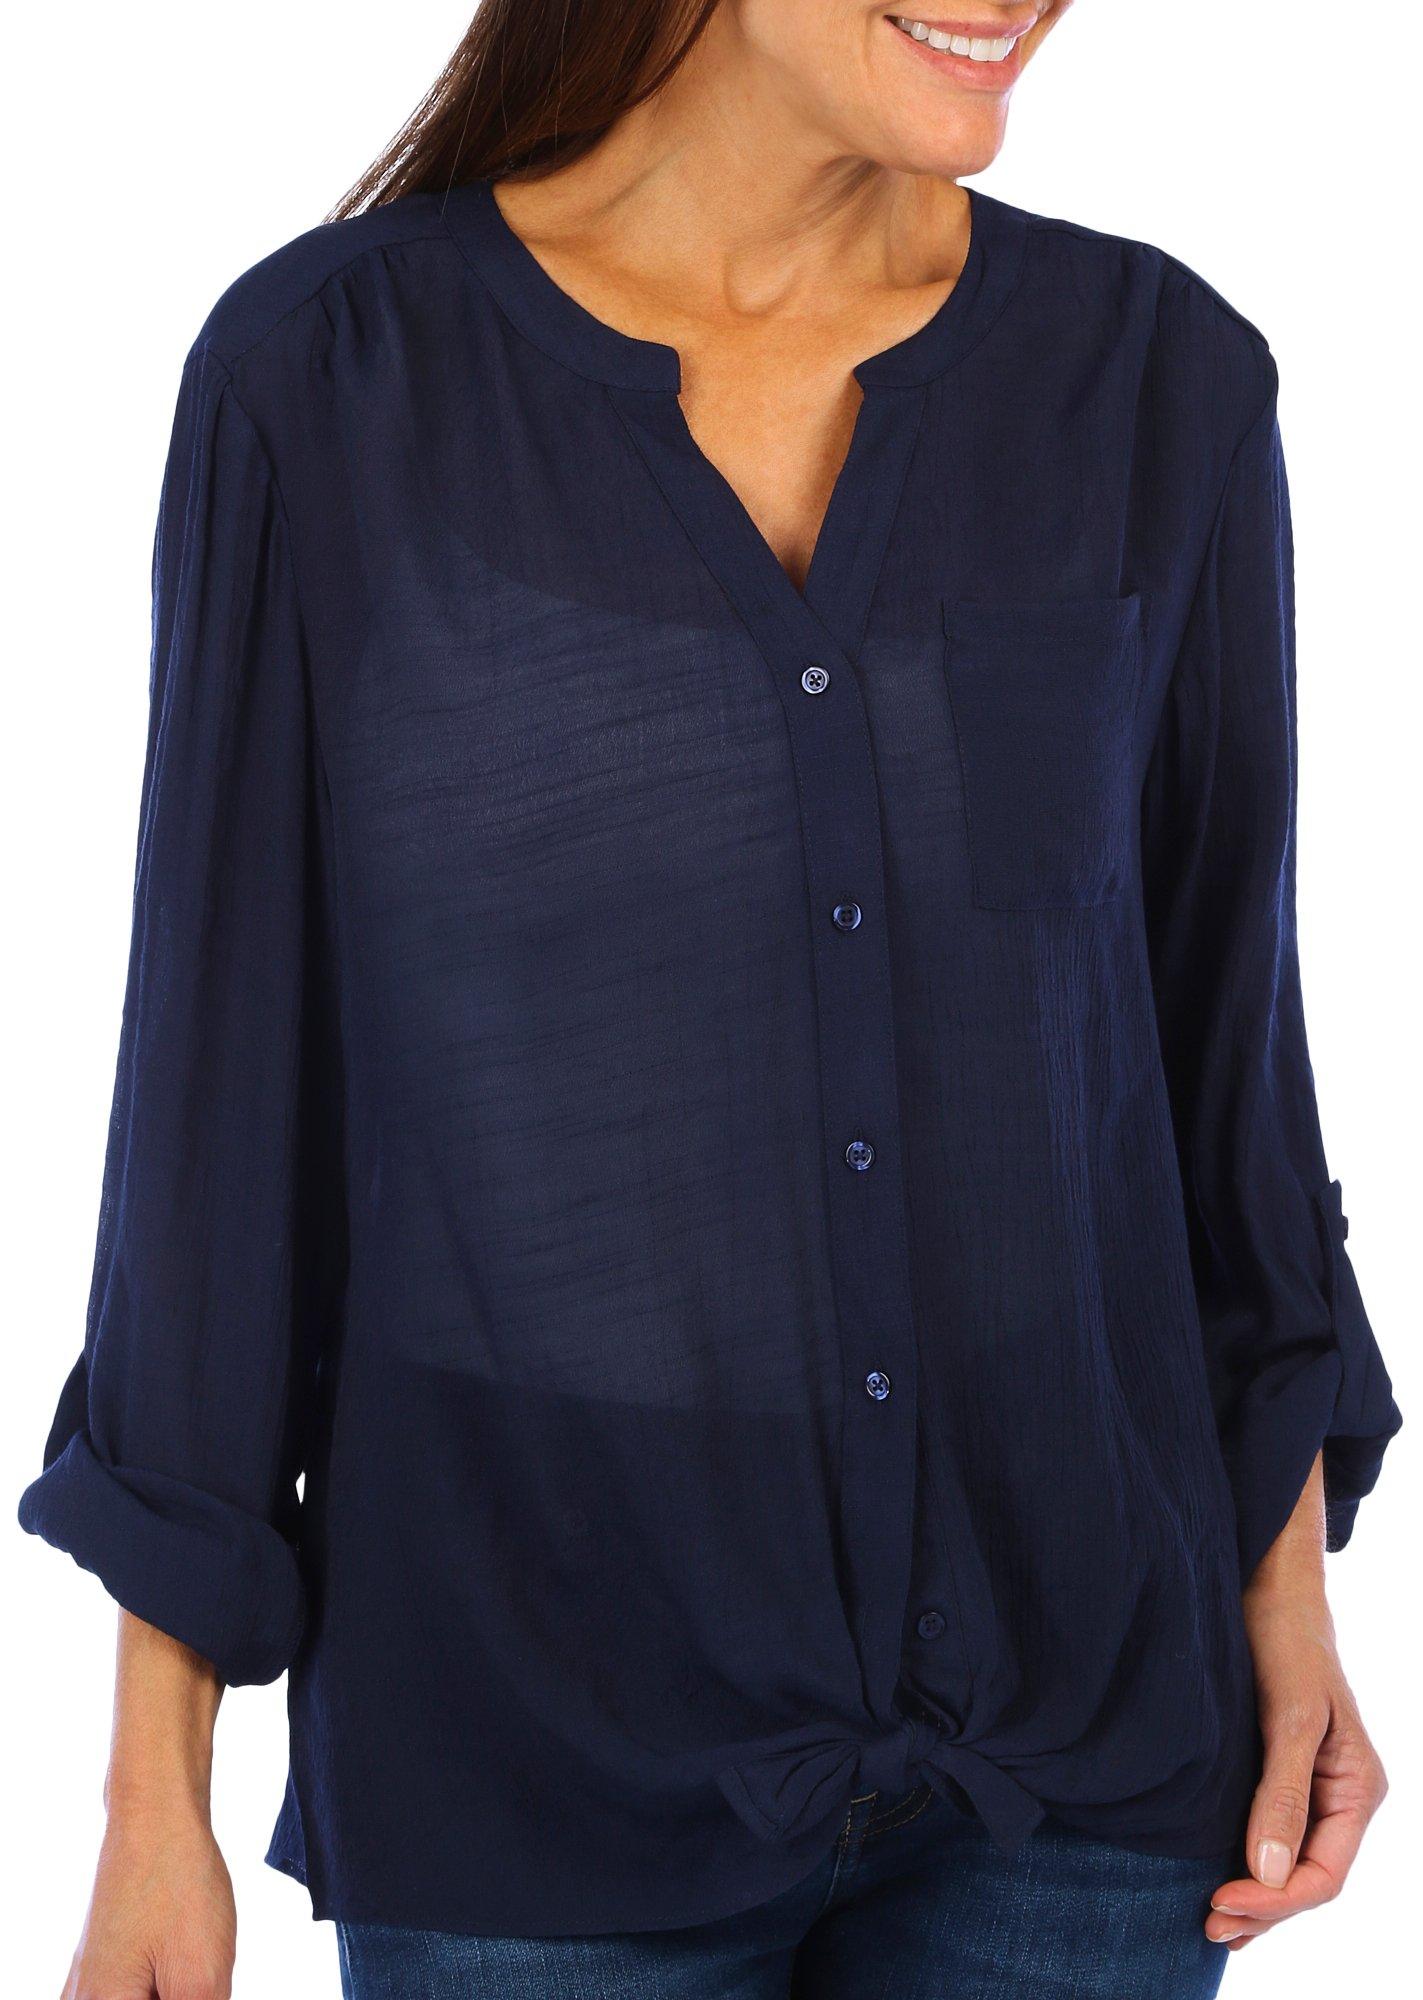 Womens 3/4 Solid Button Down Tie Front Top